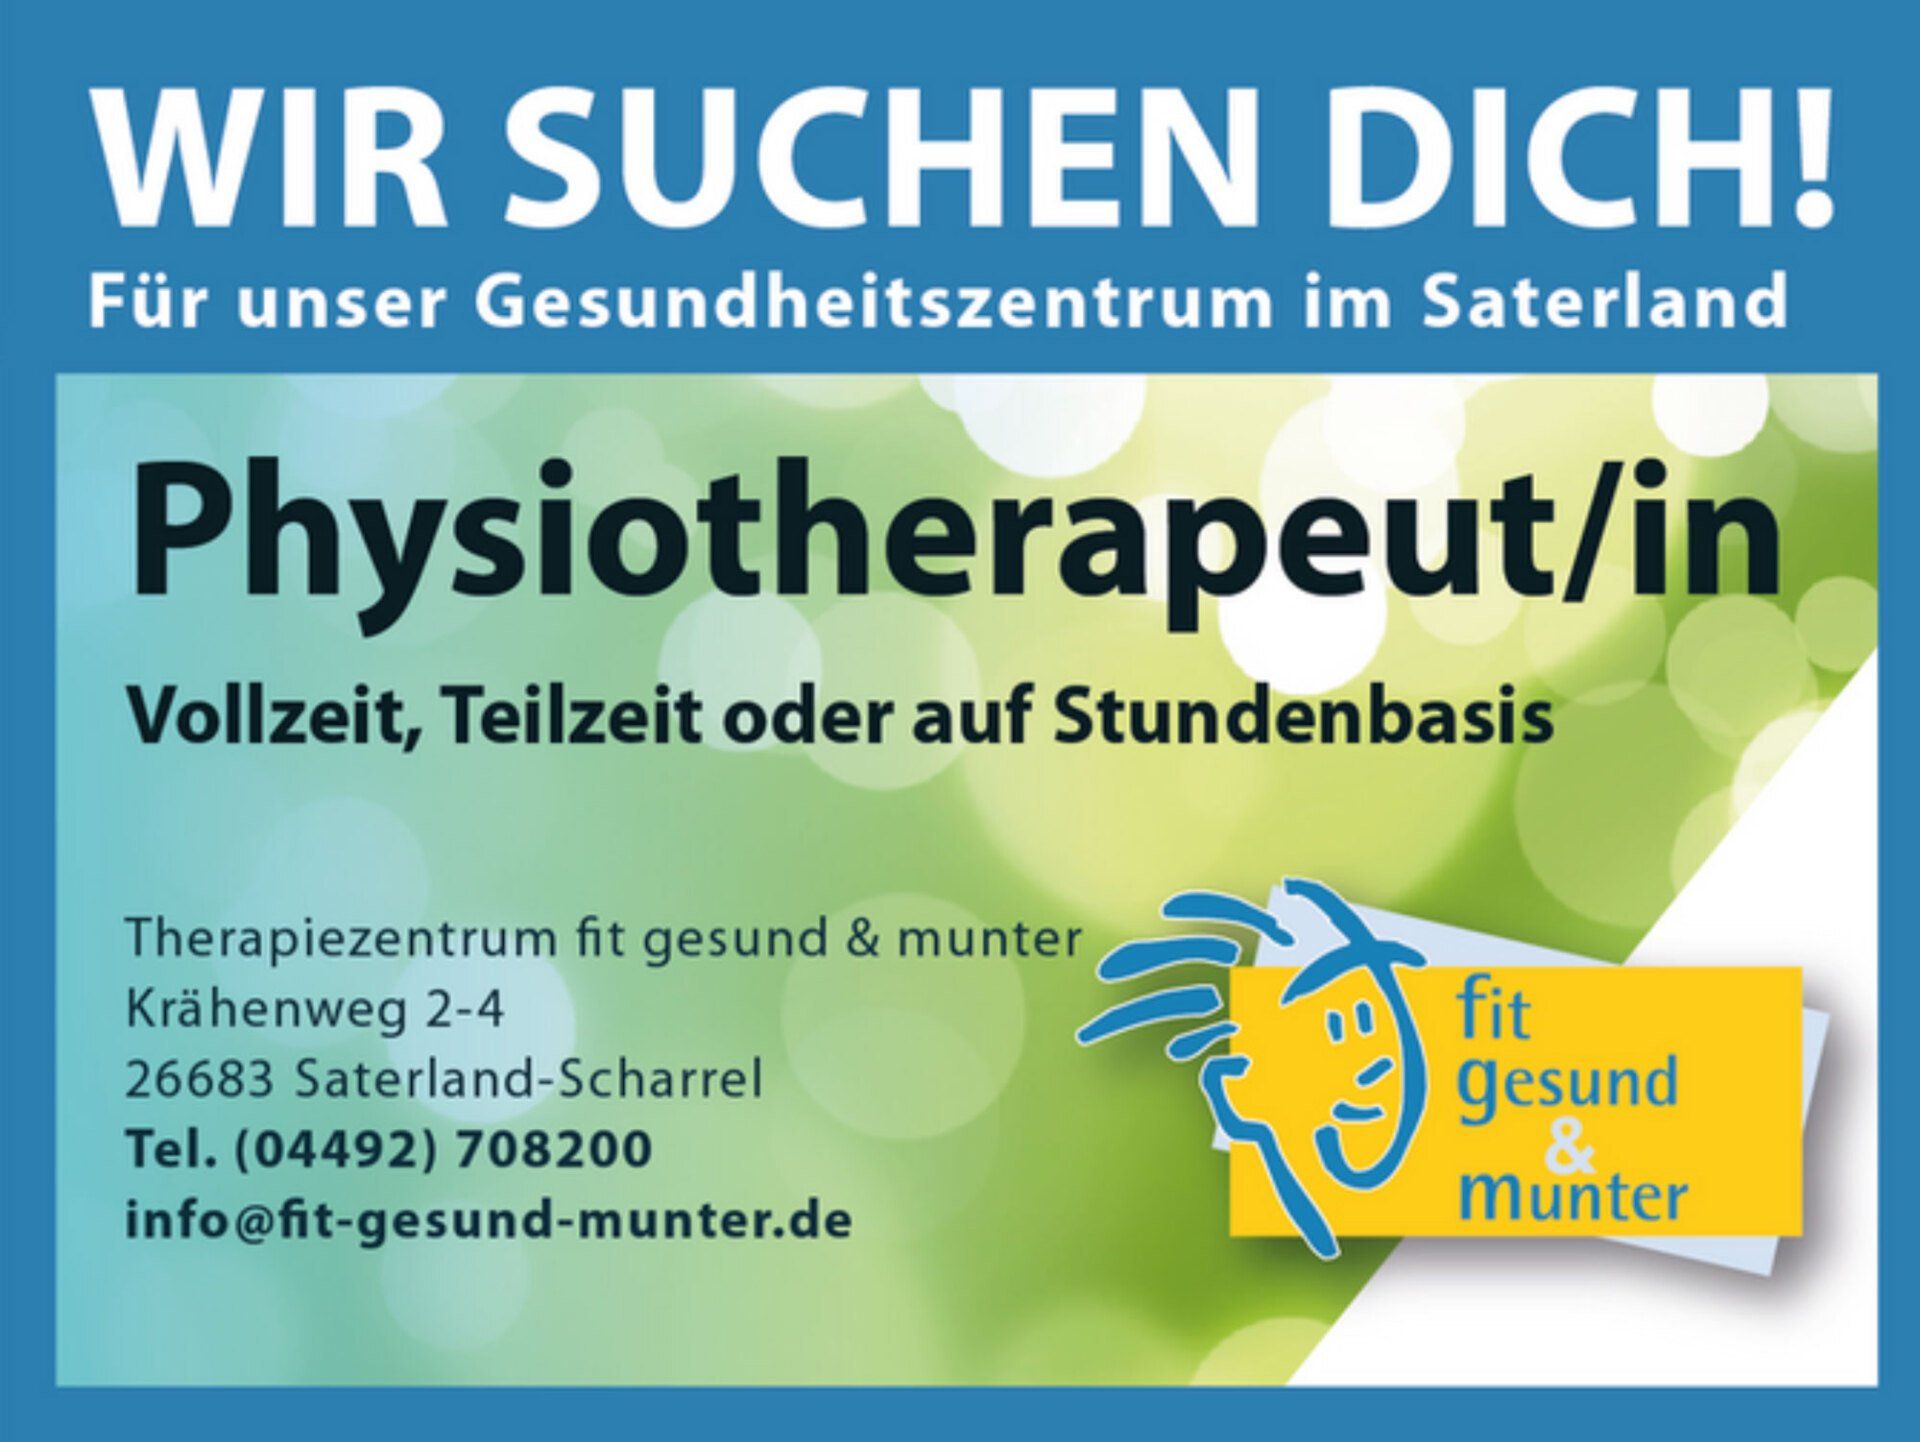 Physiotherapeut*in gesucht!